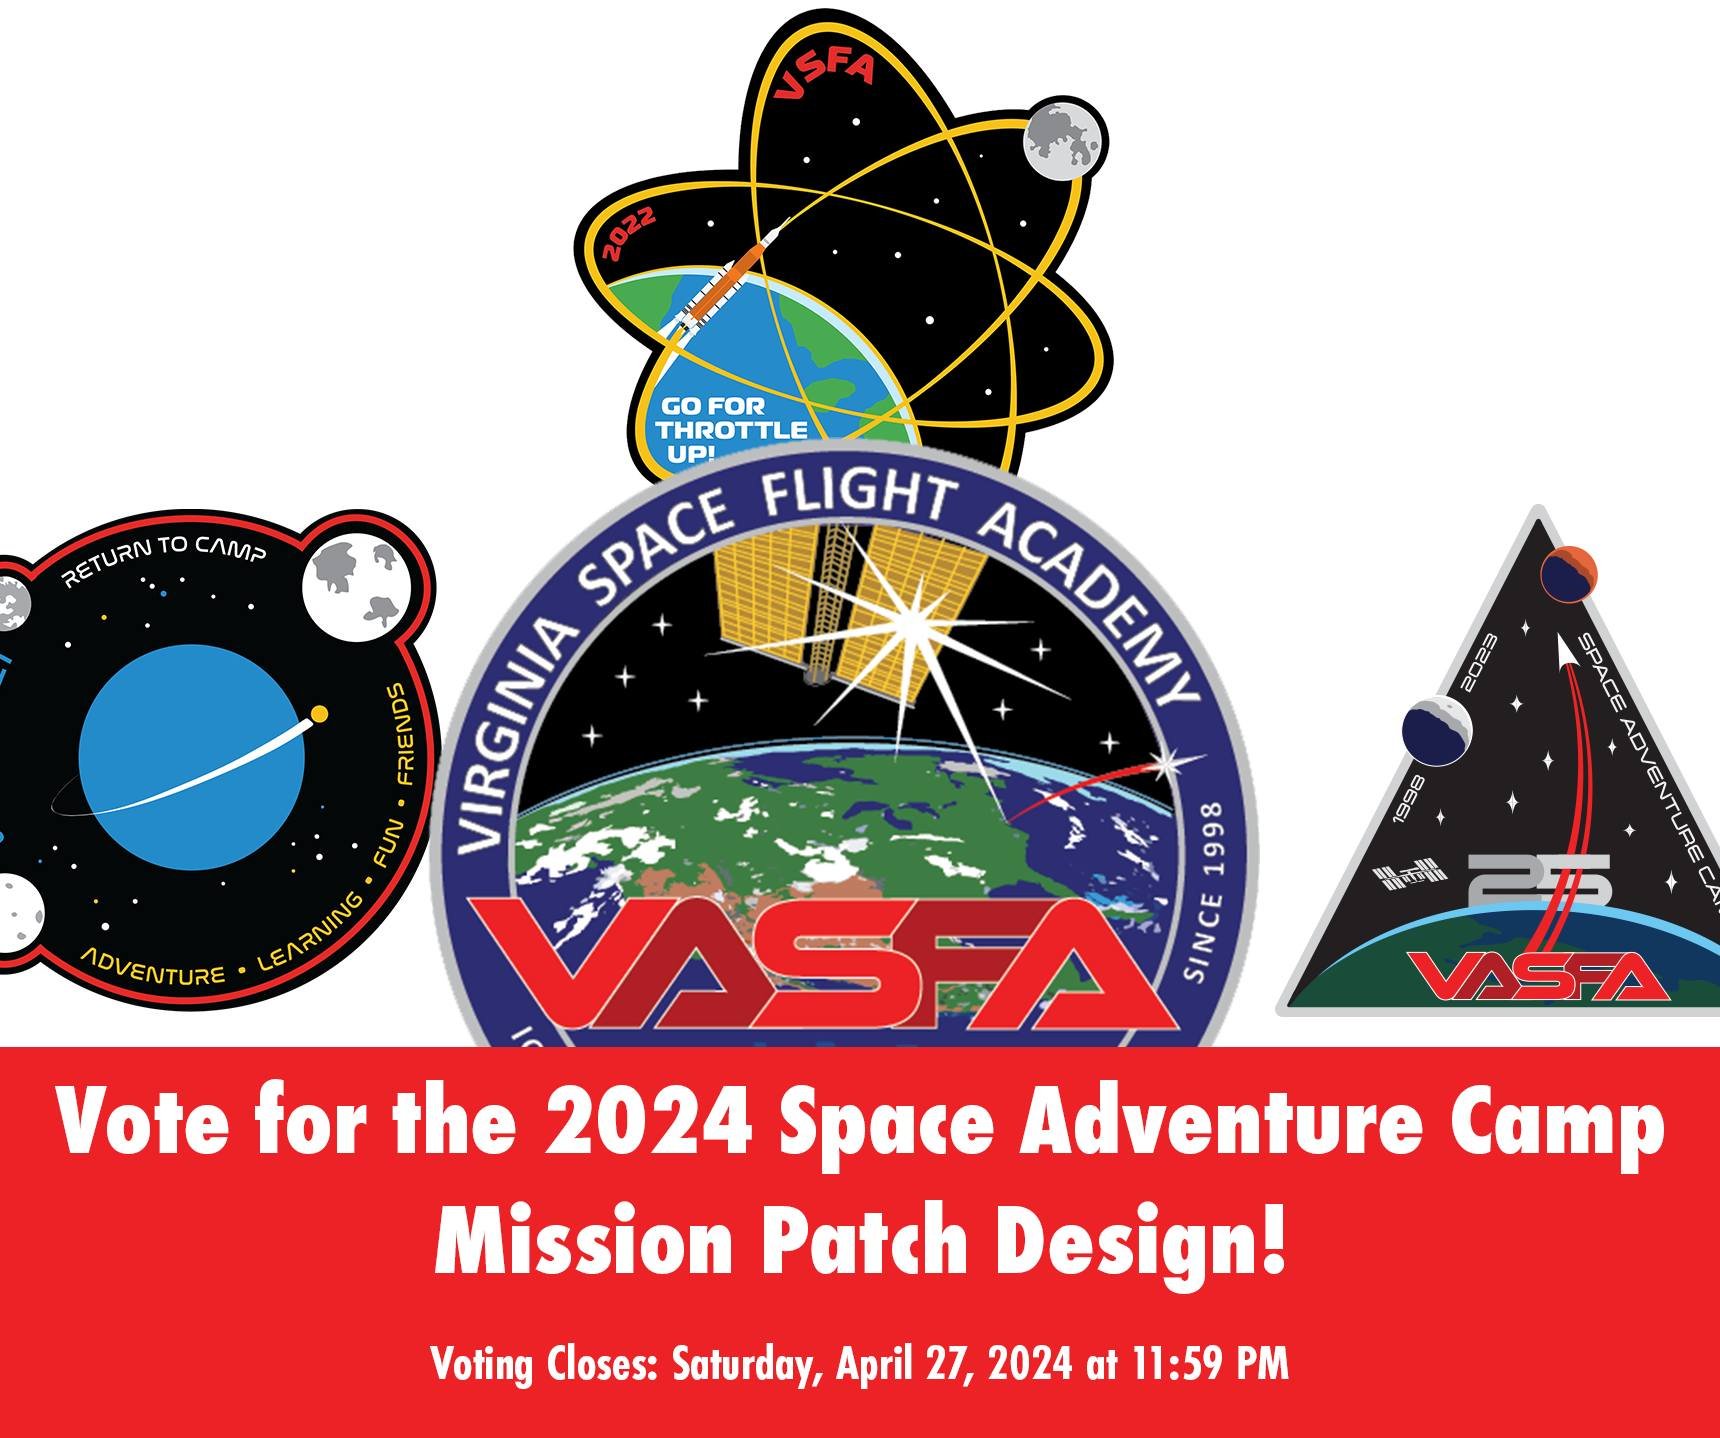 🚀 Rock(et) the Vote!

Our 2024 Space Adventure Campers created some fantastic designs for the Mission Patch Contest! Now we would appreciate your help picking the best one. See the designs, read the artists' comments, and vote for your favorite here